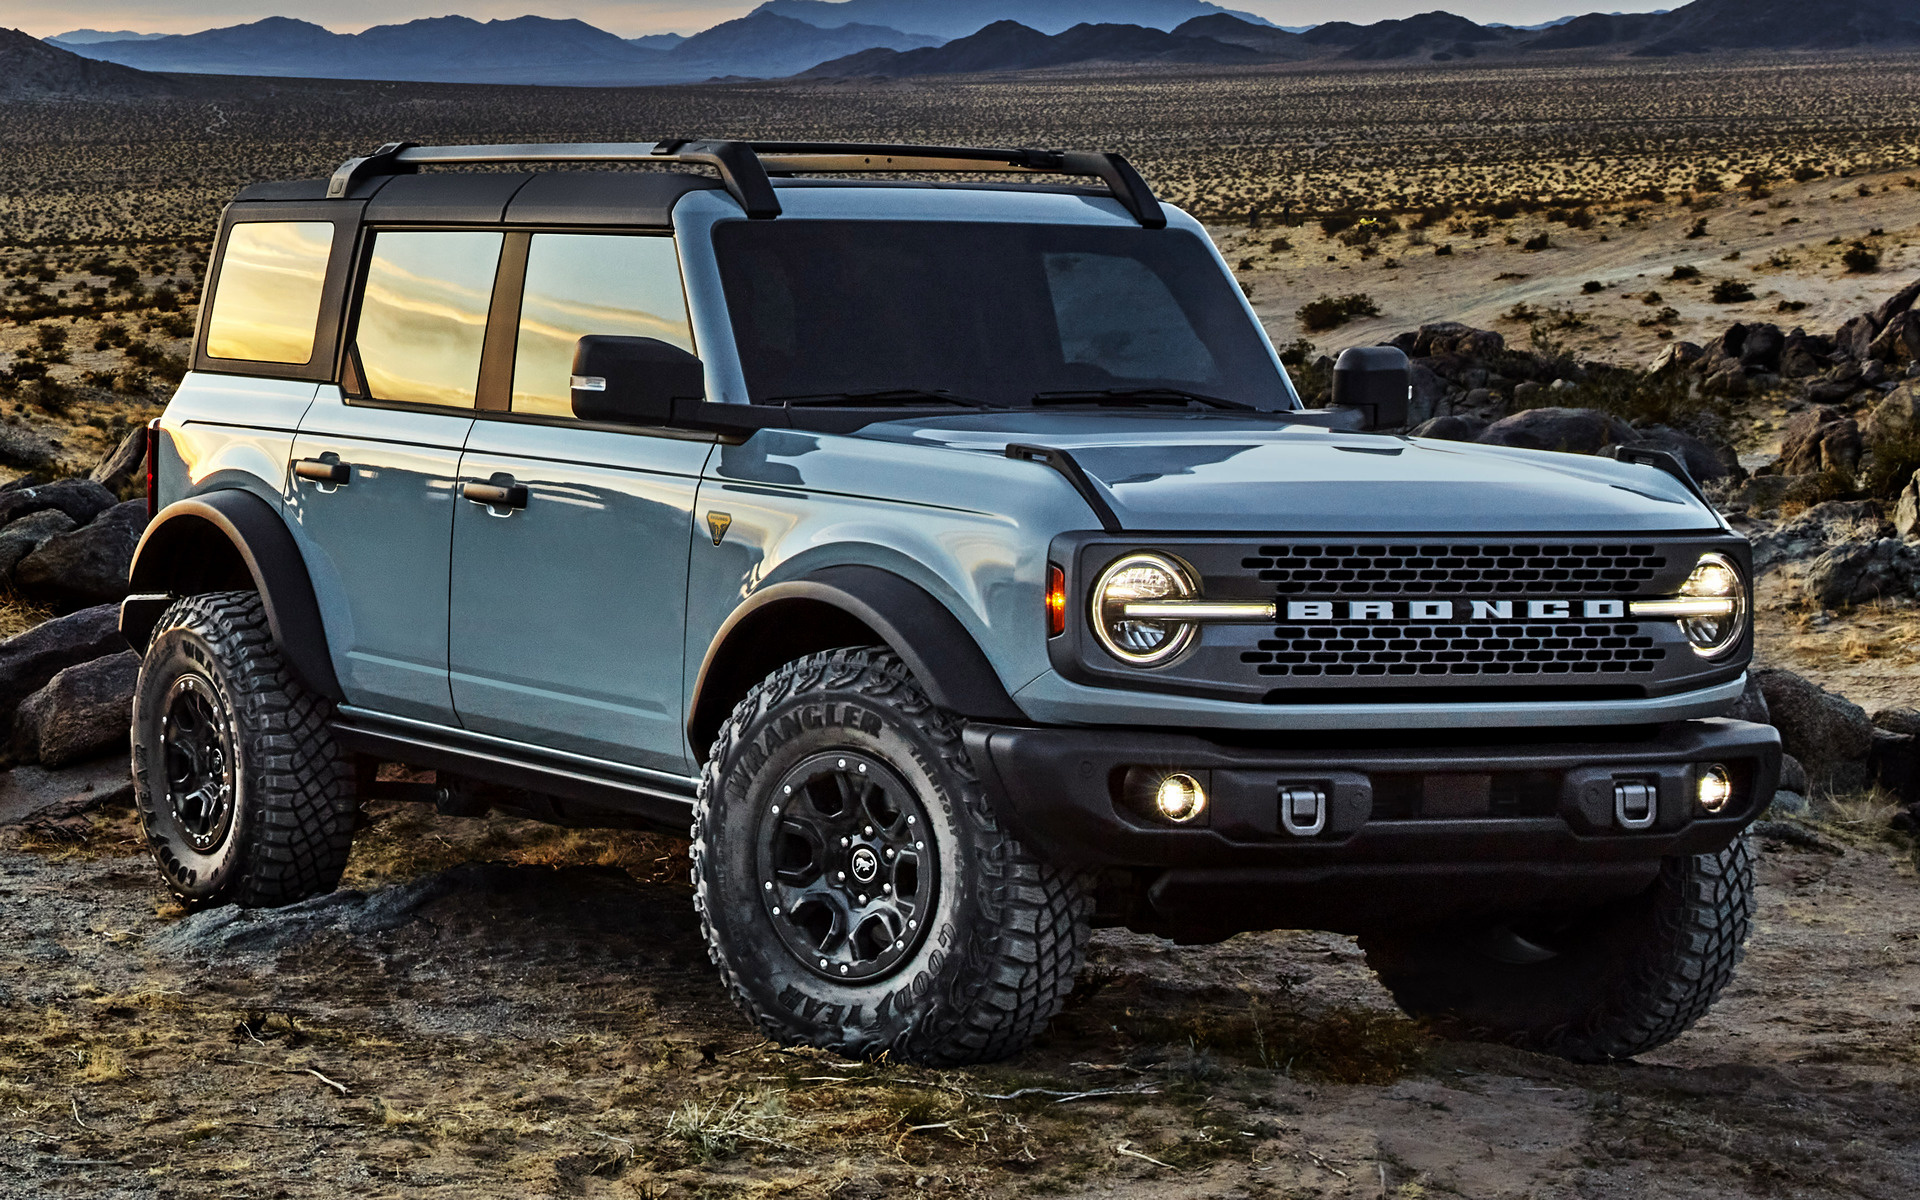 Ford Bronco: Innovative Powerful Engine, All-Terrain Vehicle, Roadster, 4x4, 2020. 1920x1200 HD Wallpaper.